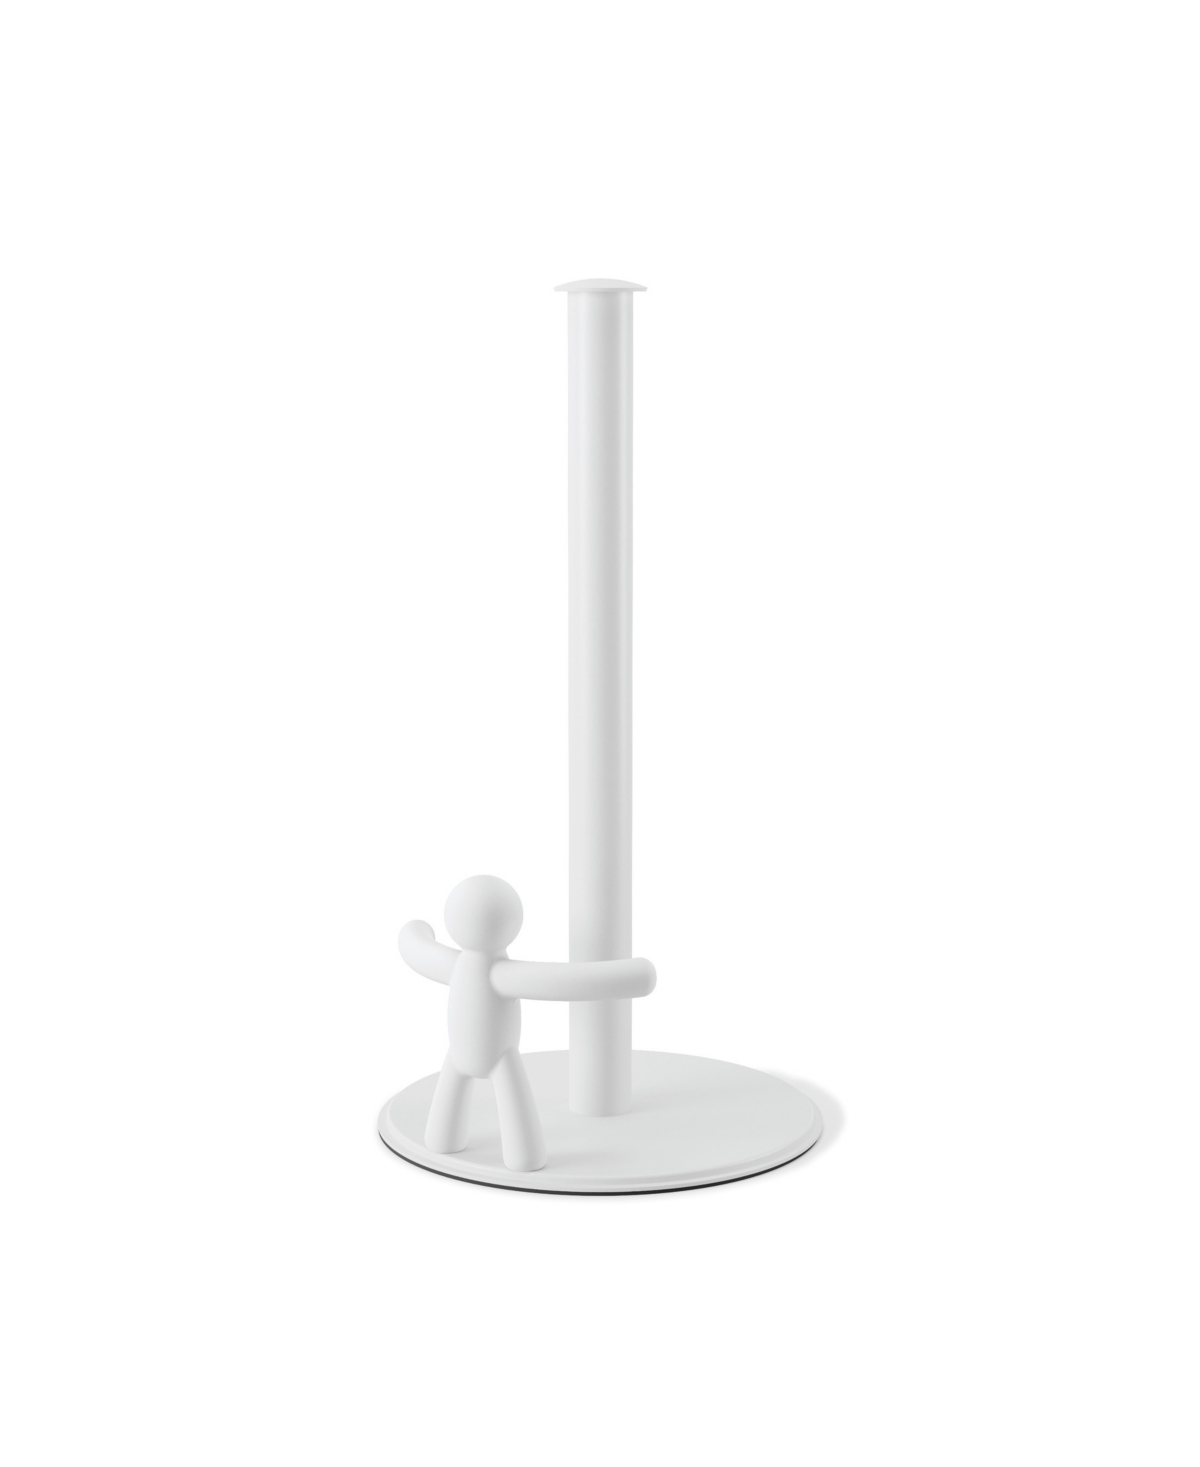 Umbra Buddy Counter Top Paper Towel Holder In White